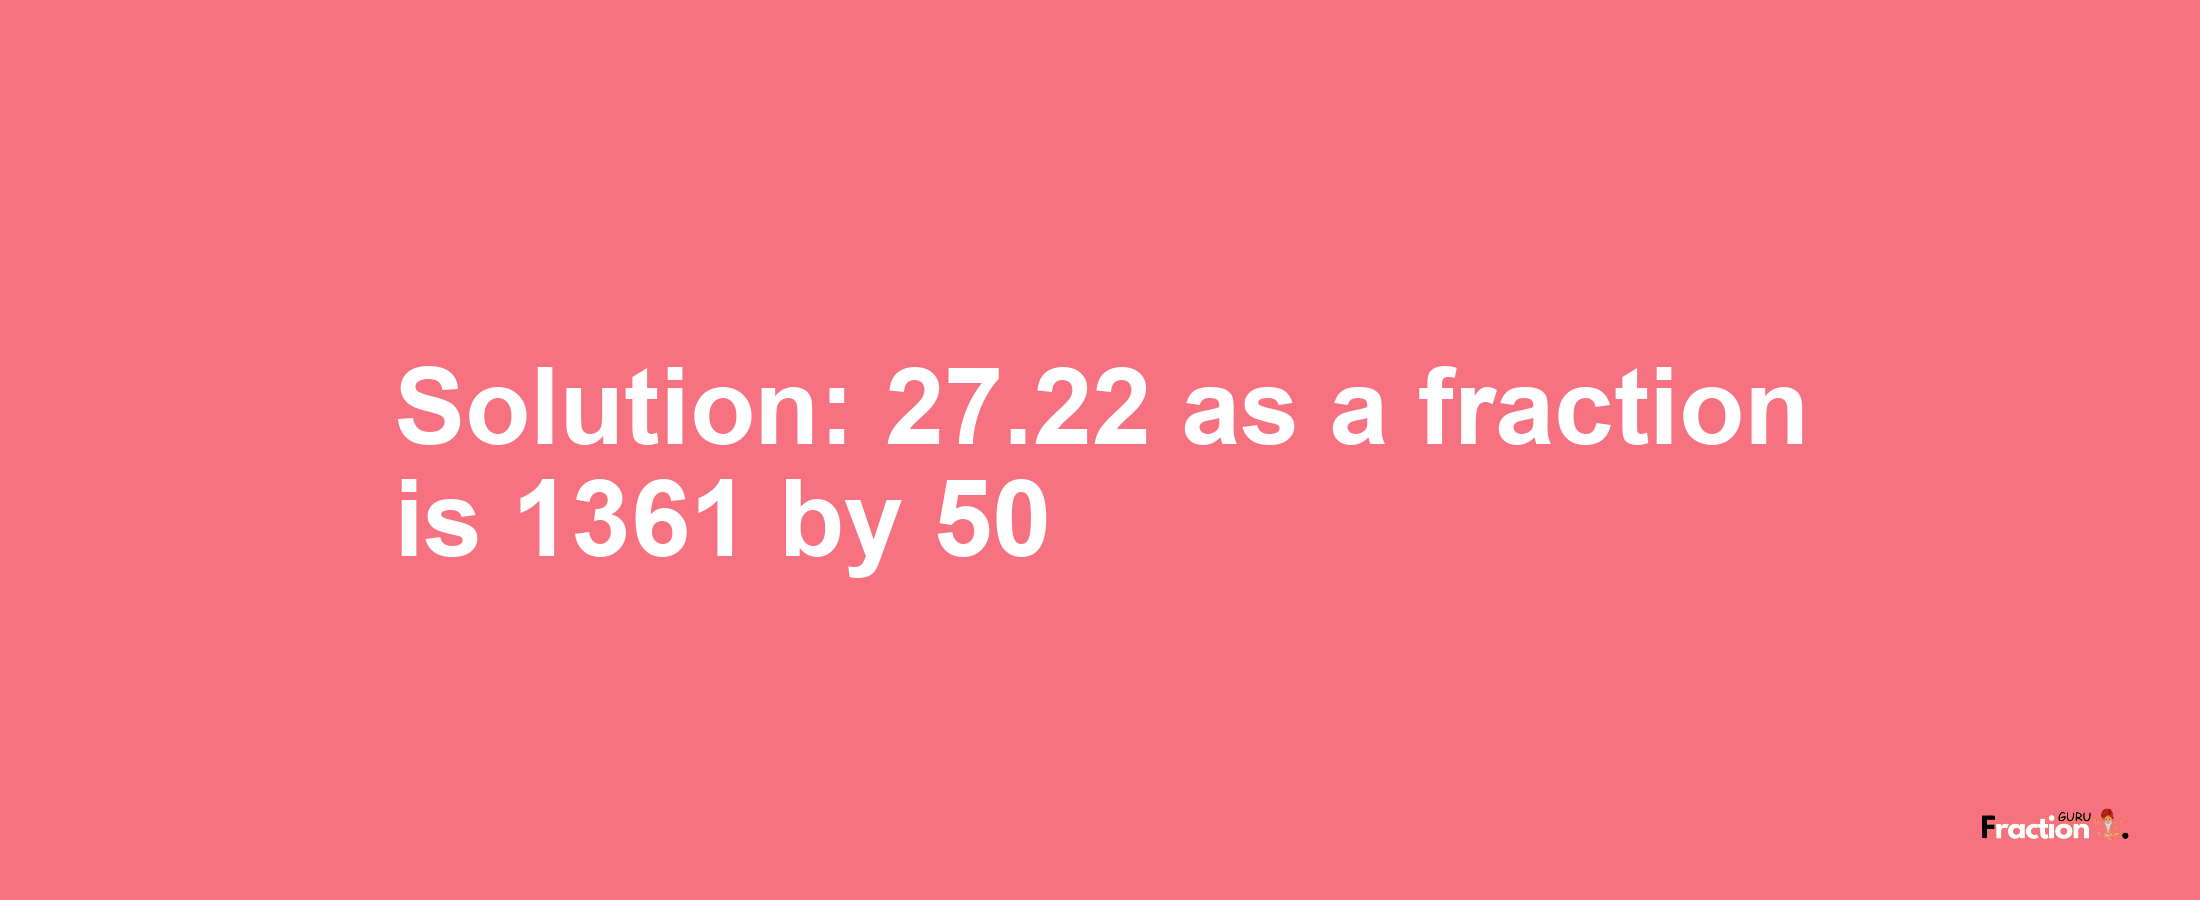 Solution:27.22 as a fraction is 1361/50